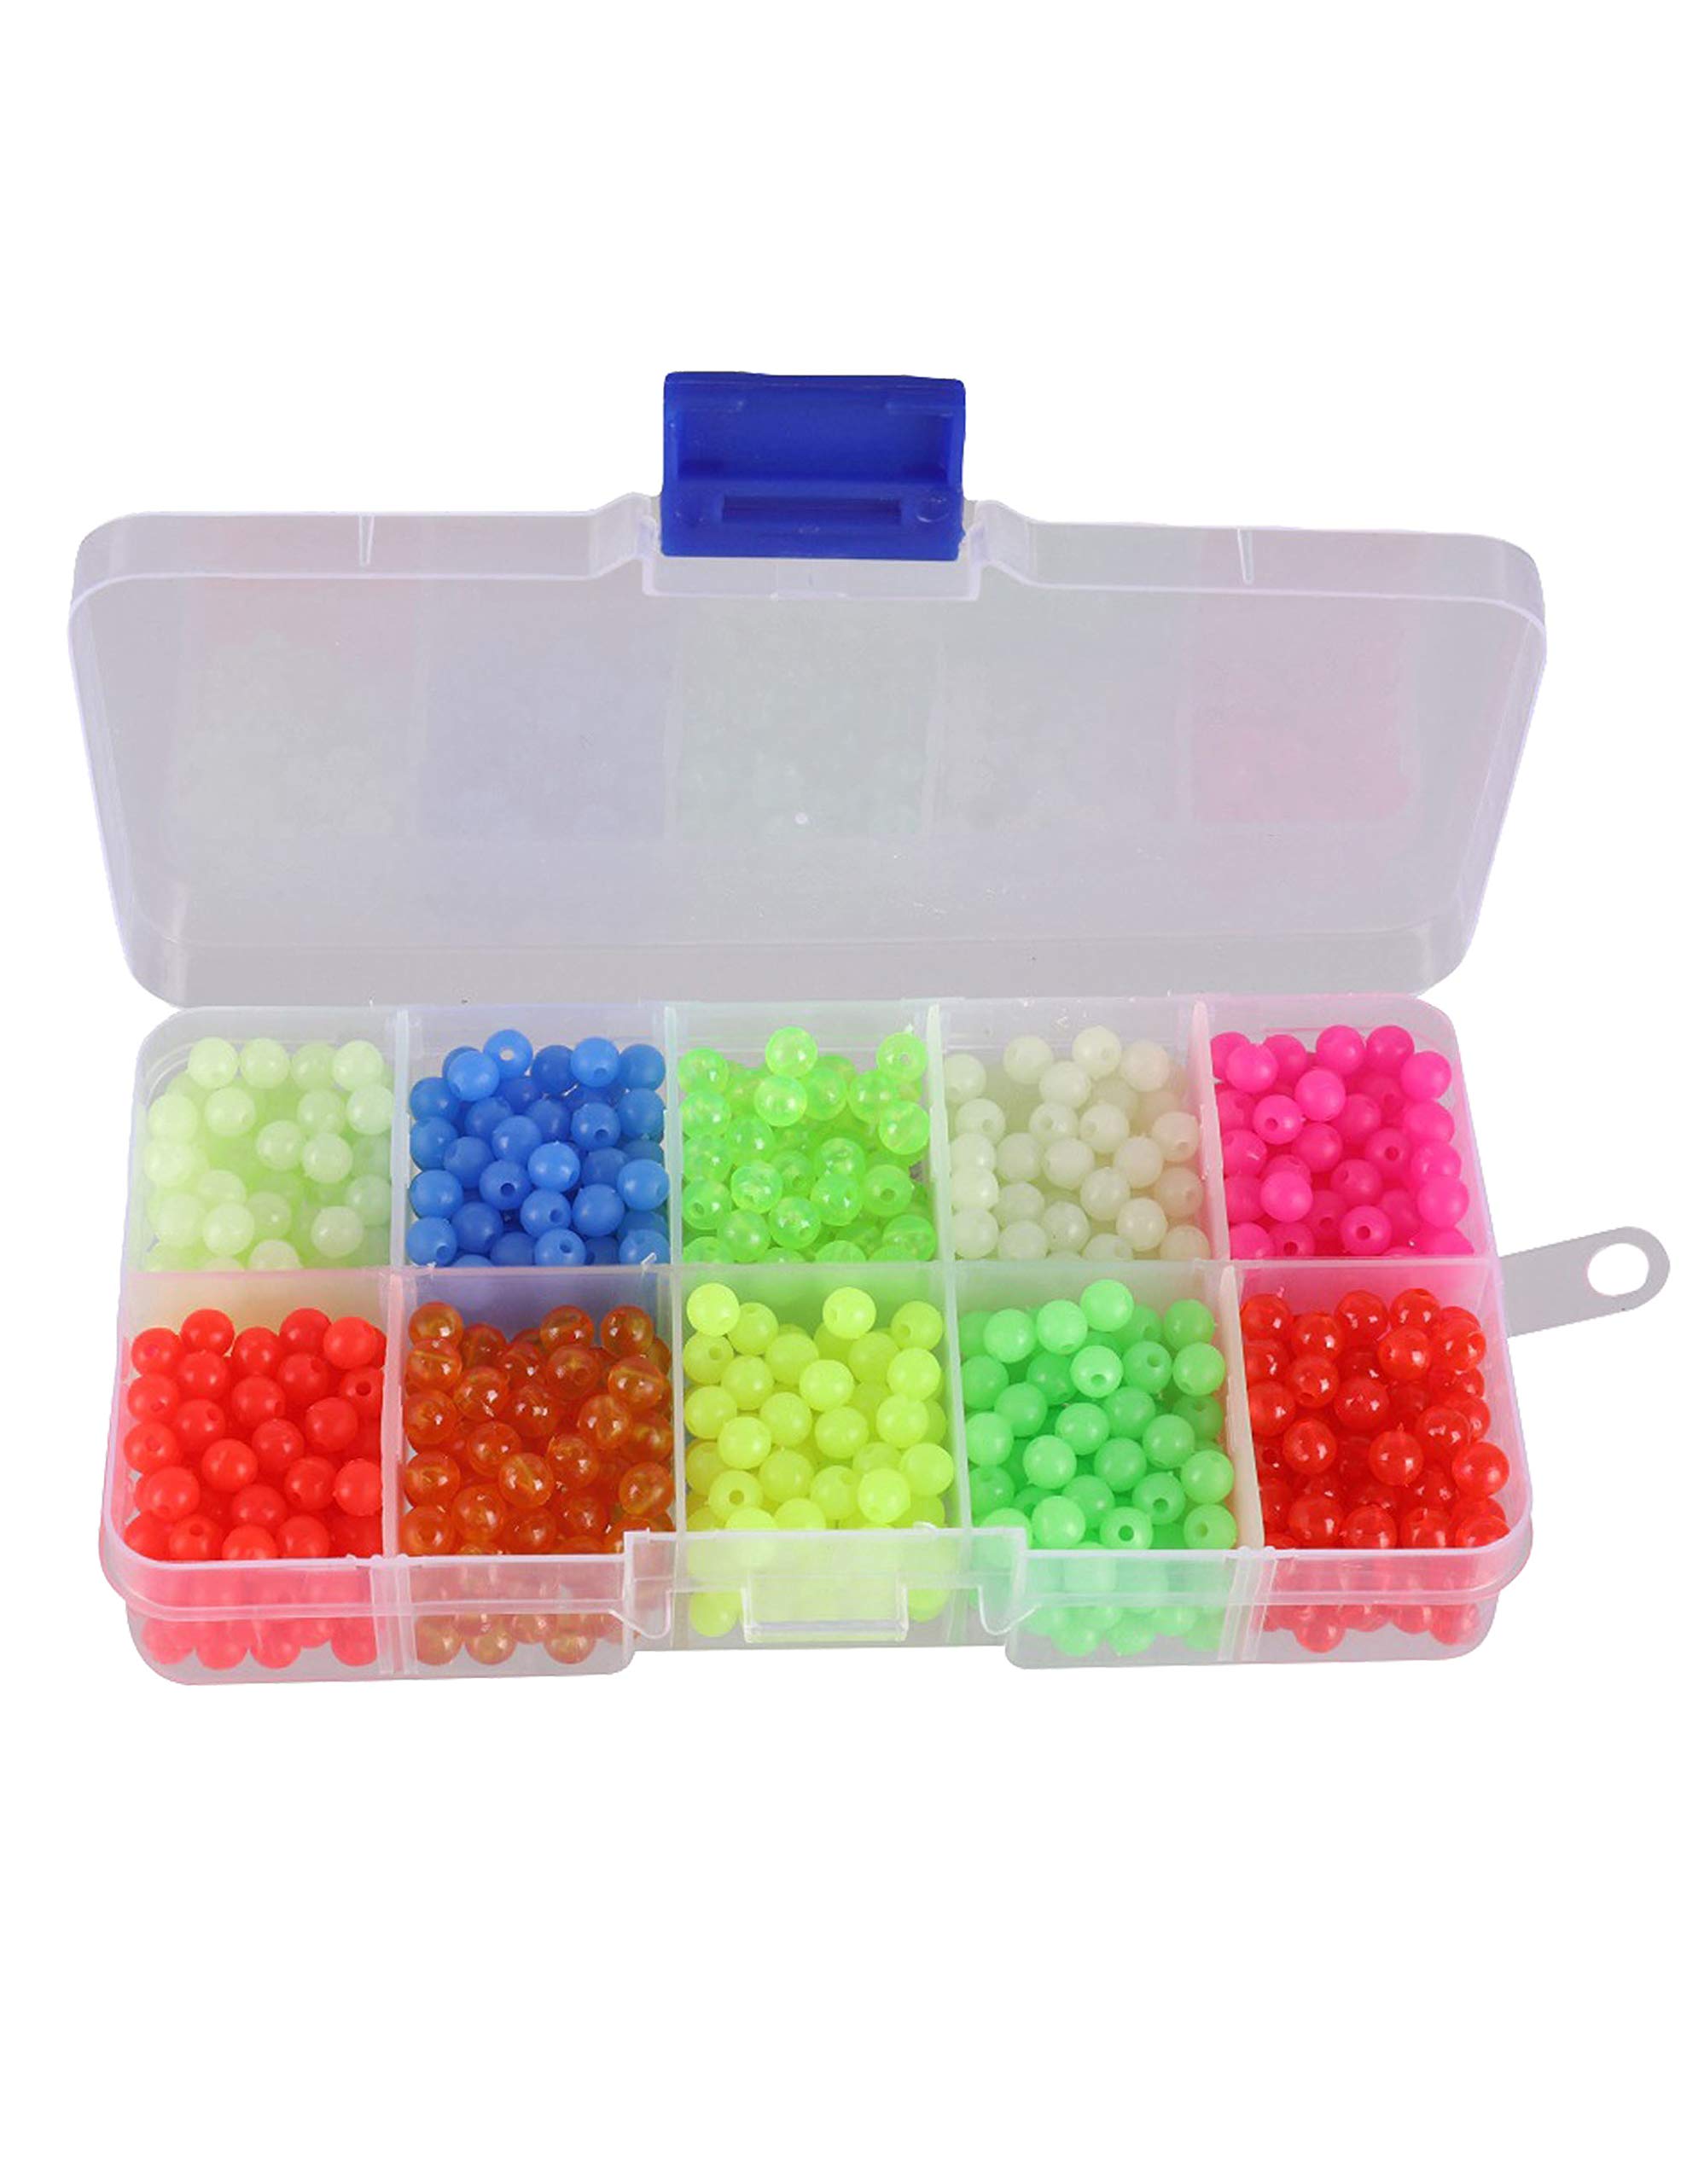 Facikono Fishing Beads Assorted Set, 1000pcs 5mm Round Float Glow Fishing  Rig Beads Fishing Lure Tackle 10 Colors - 1000 Pack